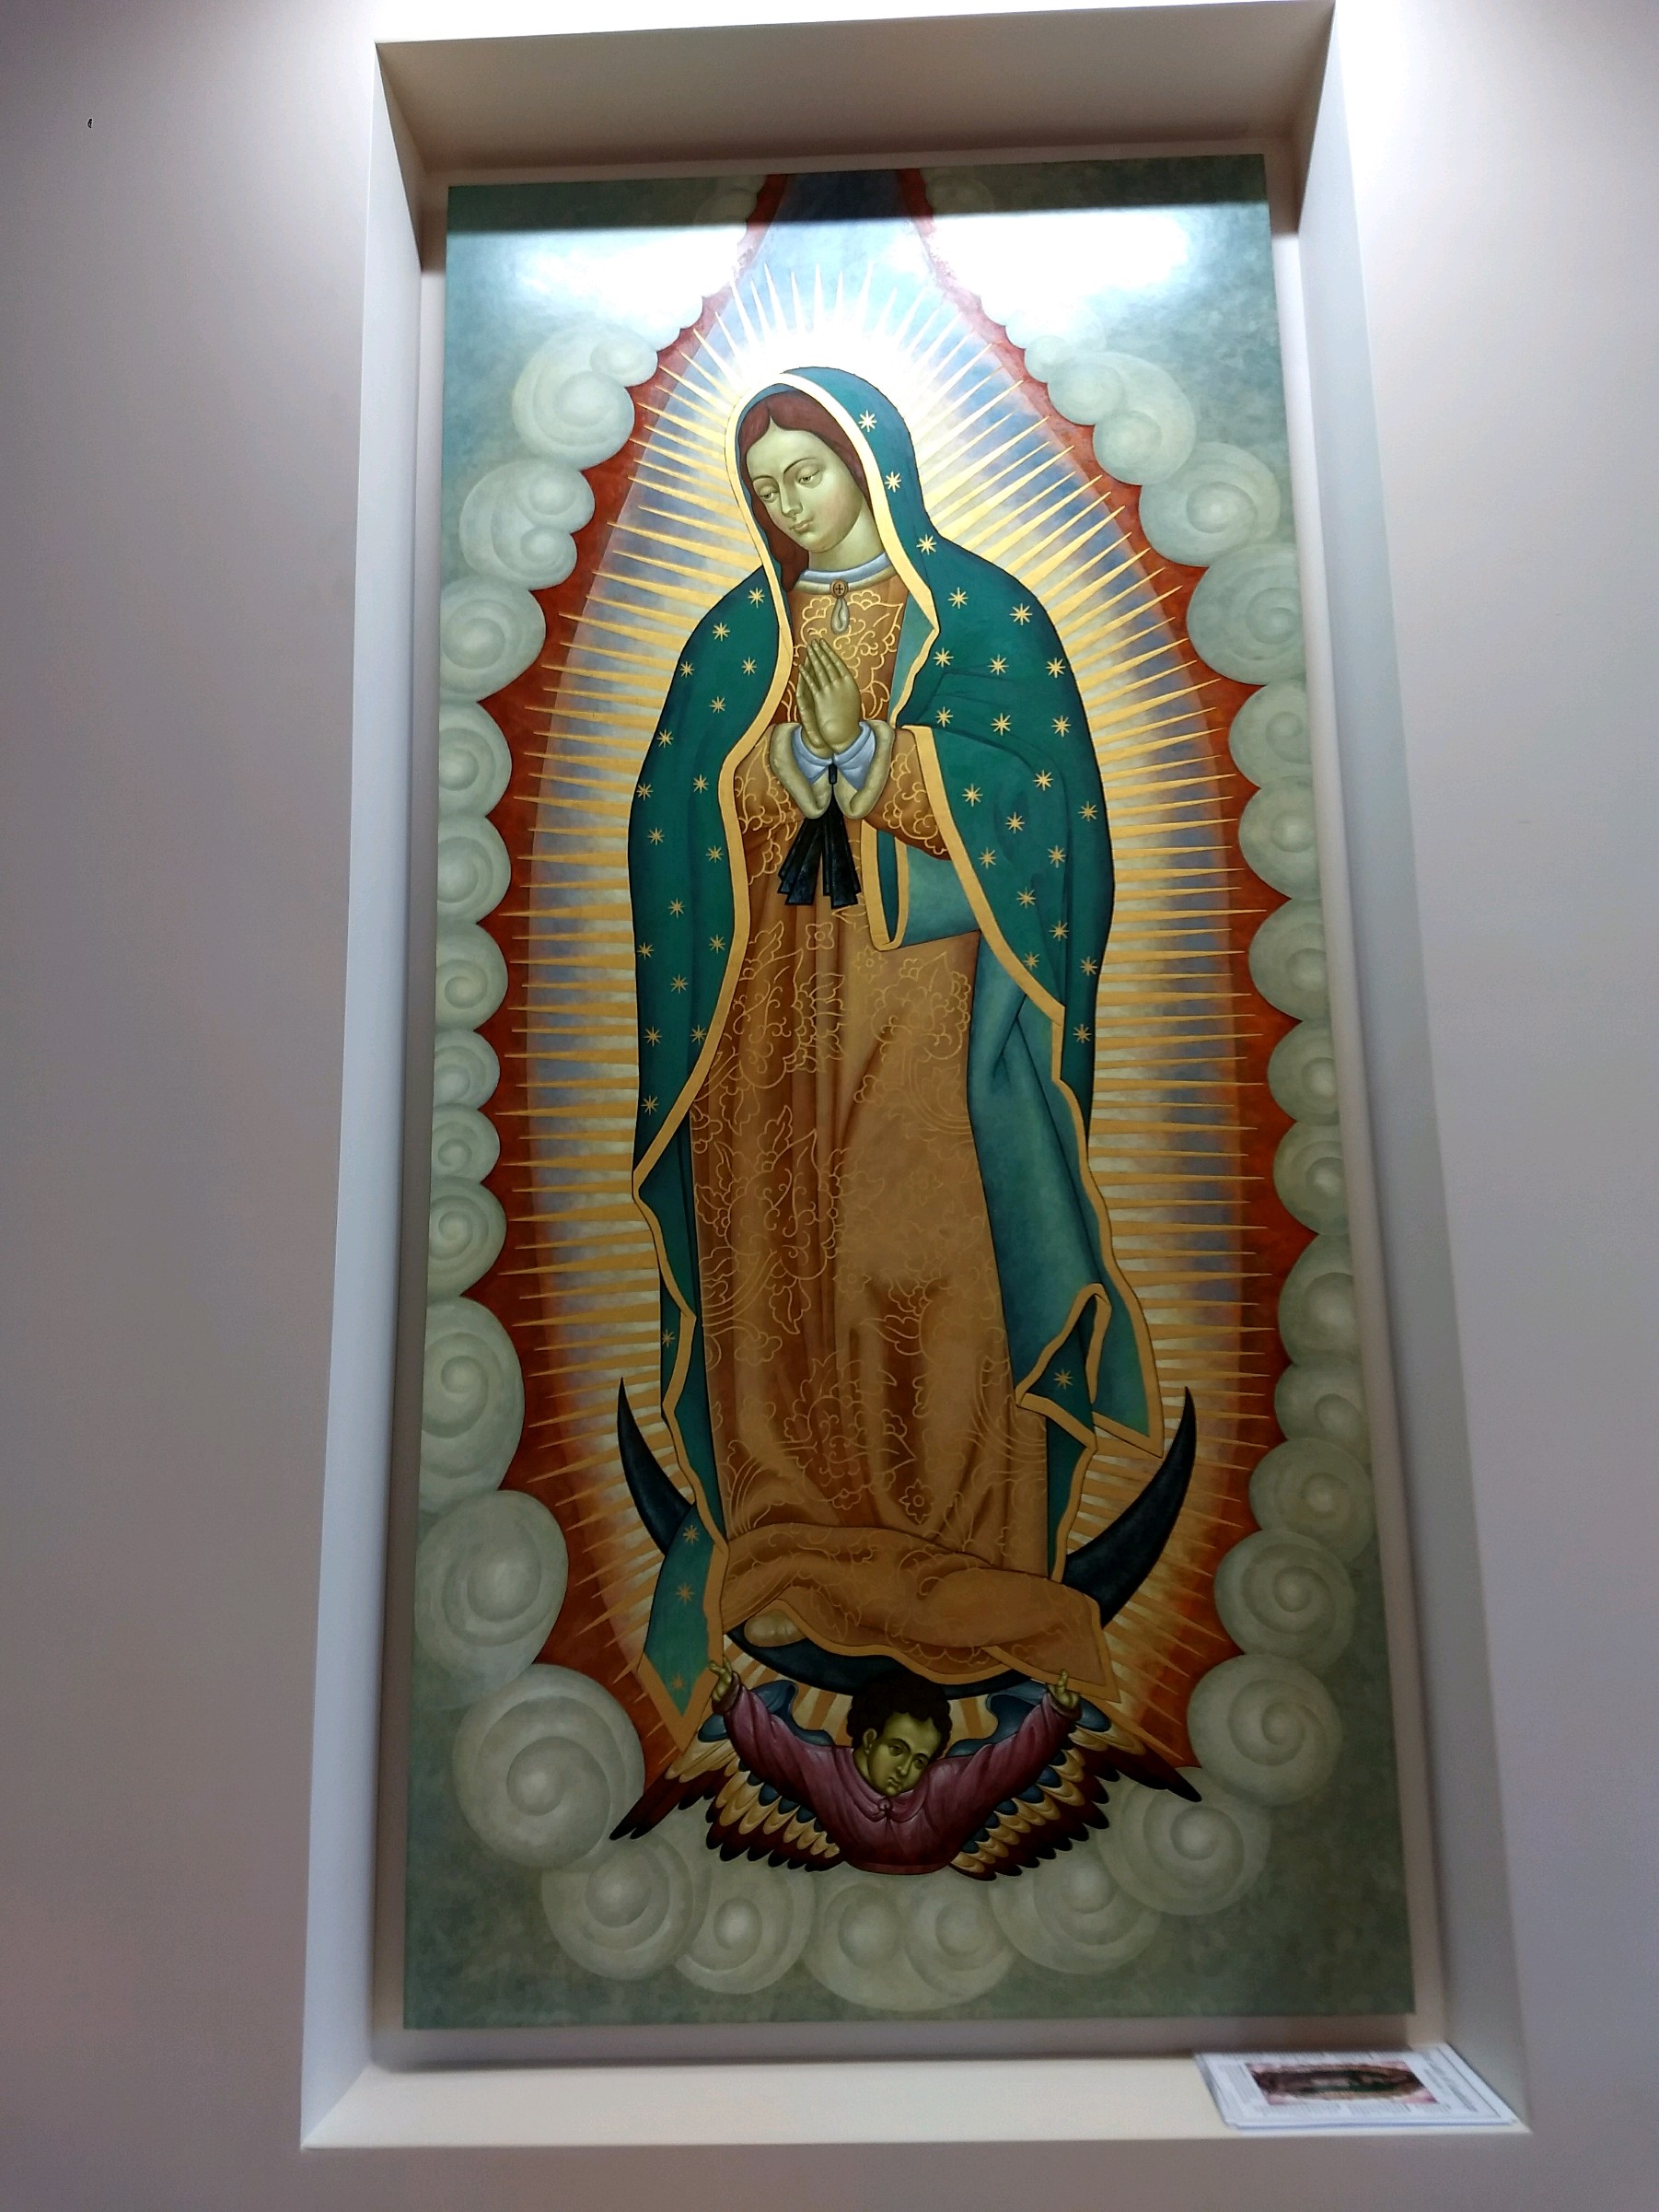   March 11 &nbsp;·&nbsp; Edited &nbsp;·&nbsp;  Our Lady of Guadalupe by a local artist. I never would've believed it, but this lady likes to show up and make people smell roses, or have random roses show up in places like straight out of the ocean. P